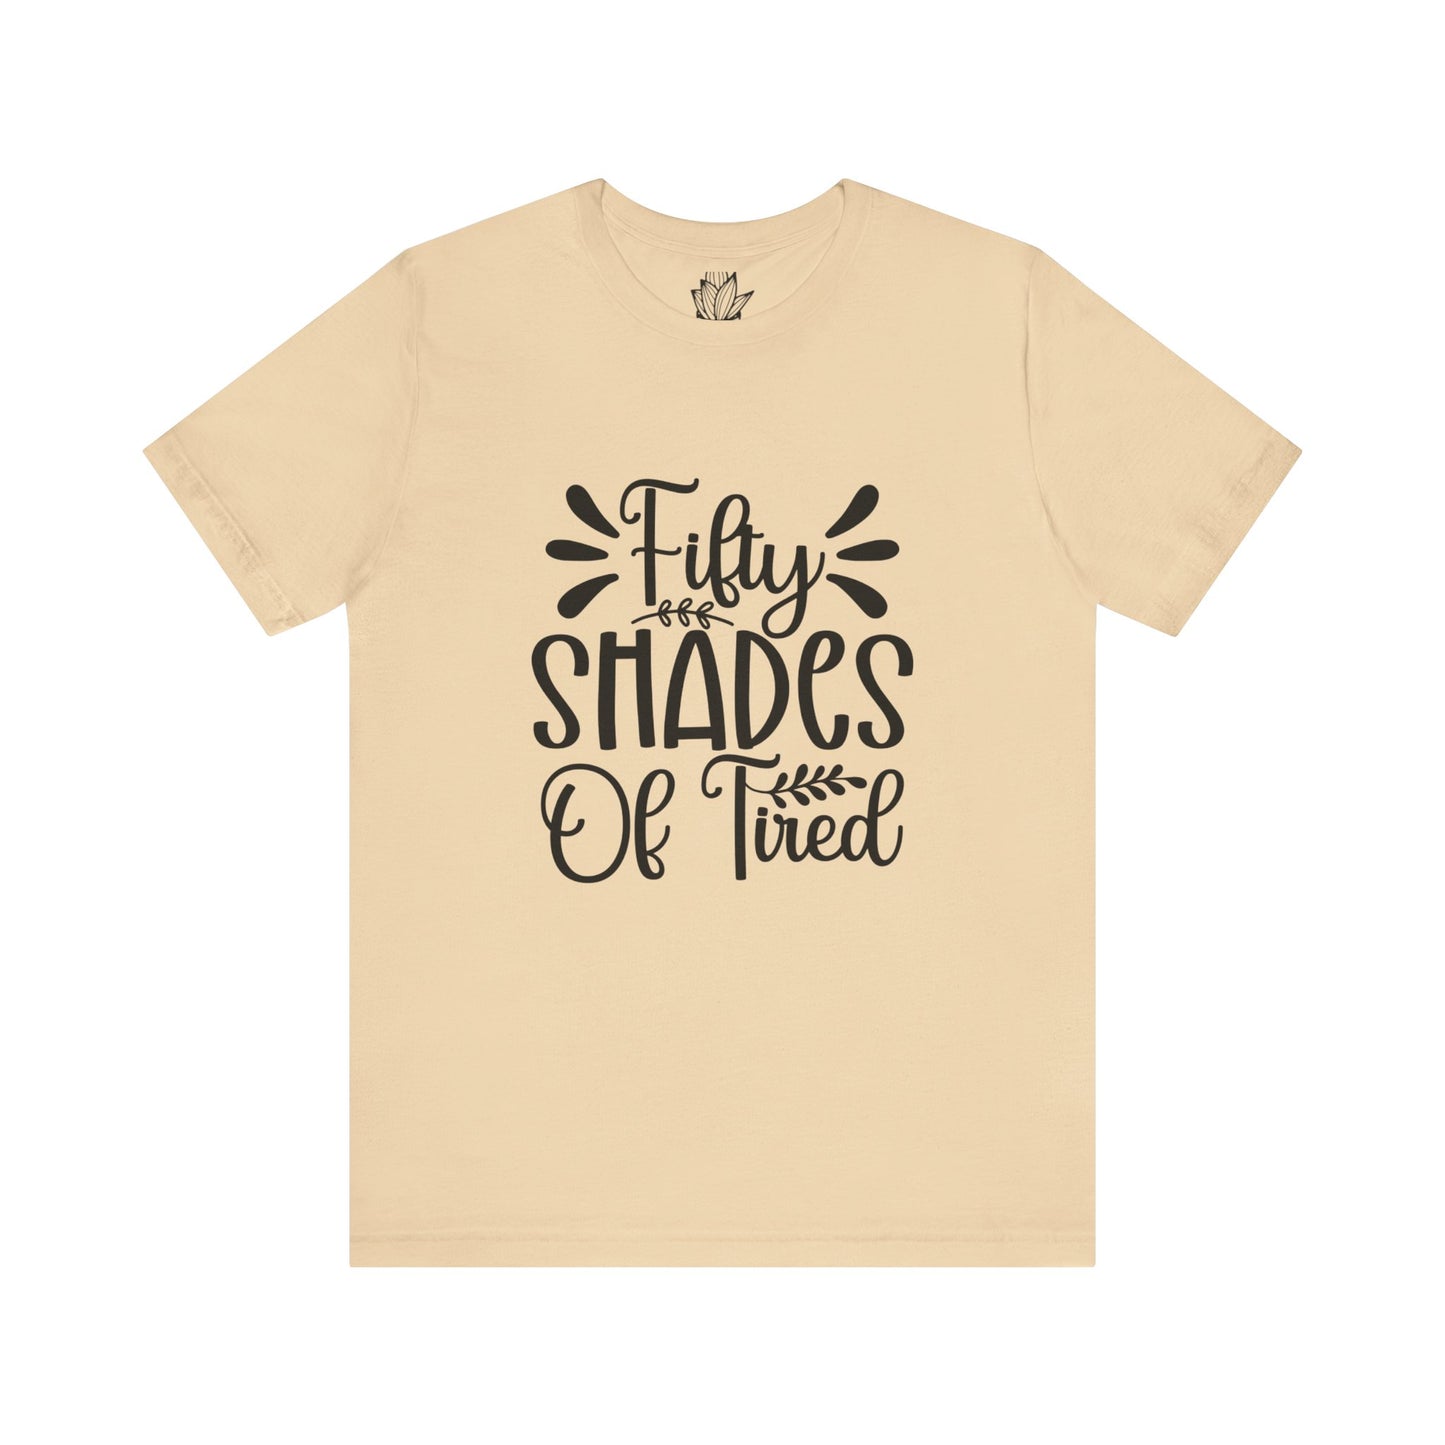 Fifty Shades of Tired Jersey Short Sleeve Tee